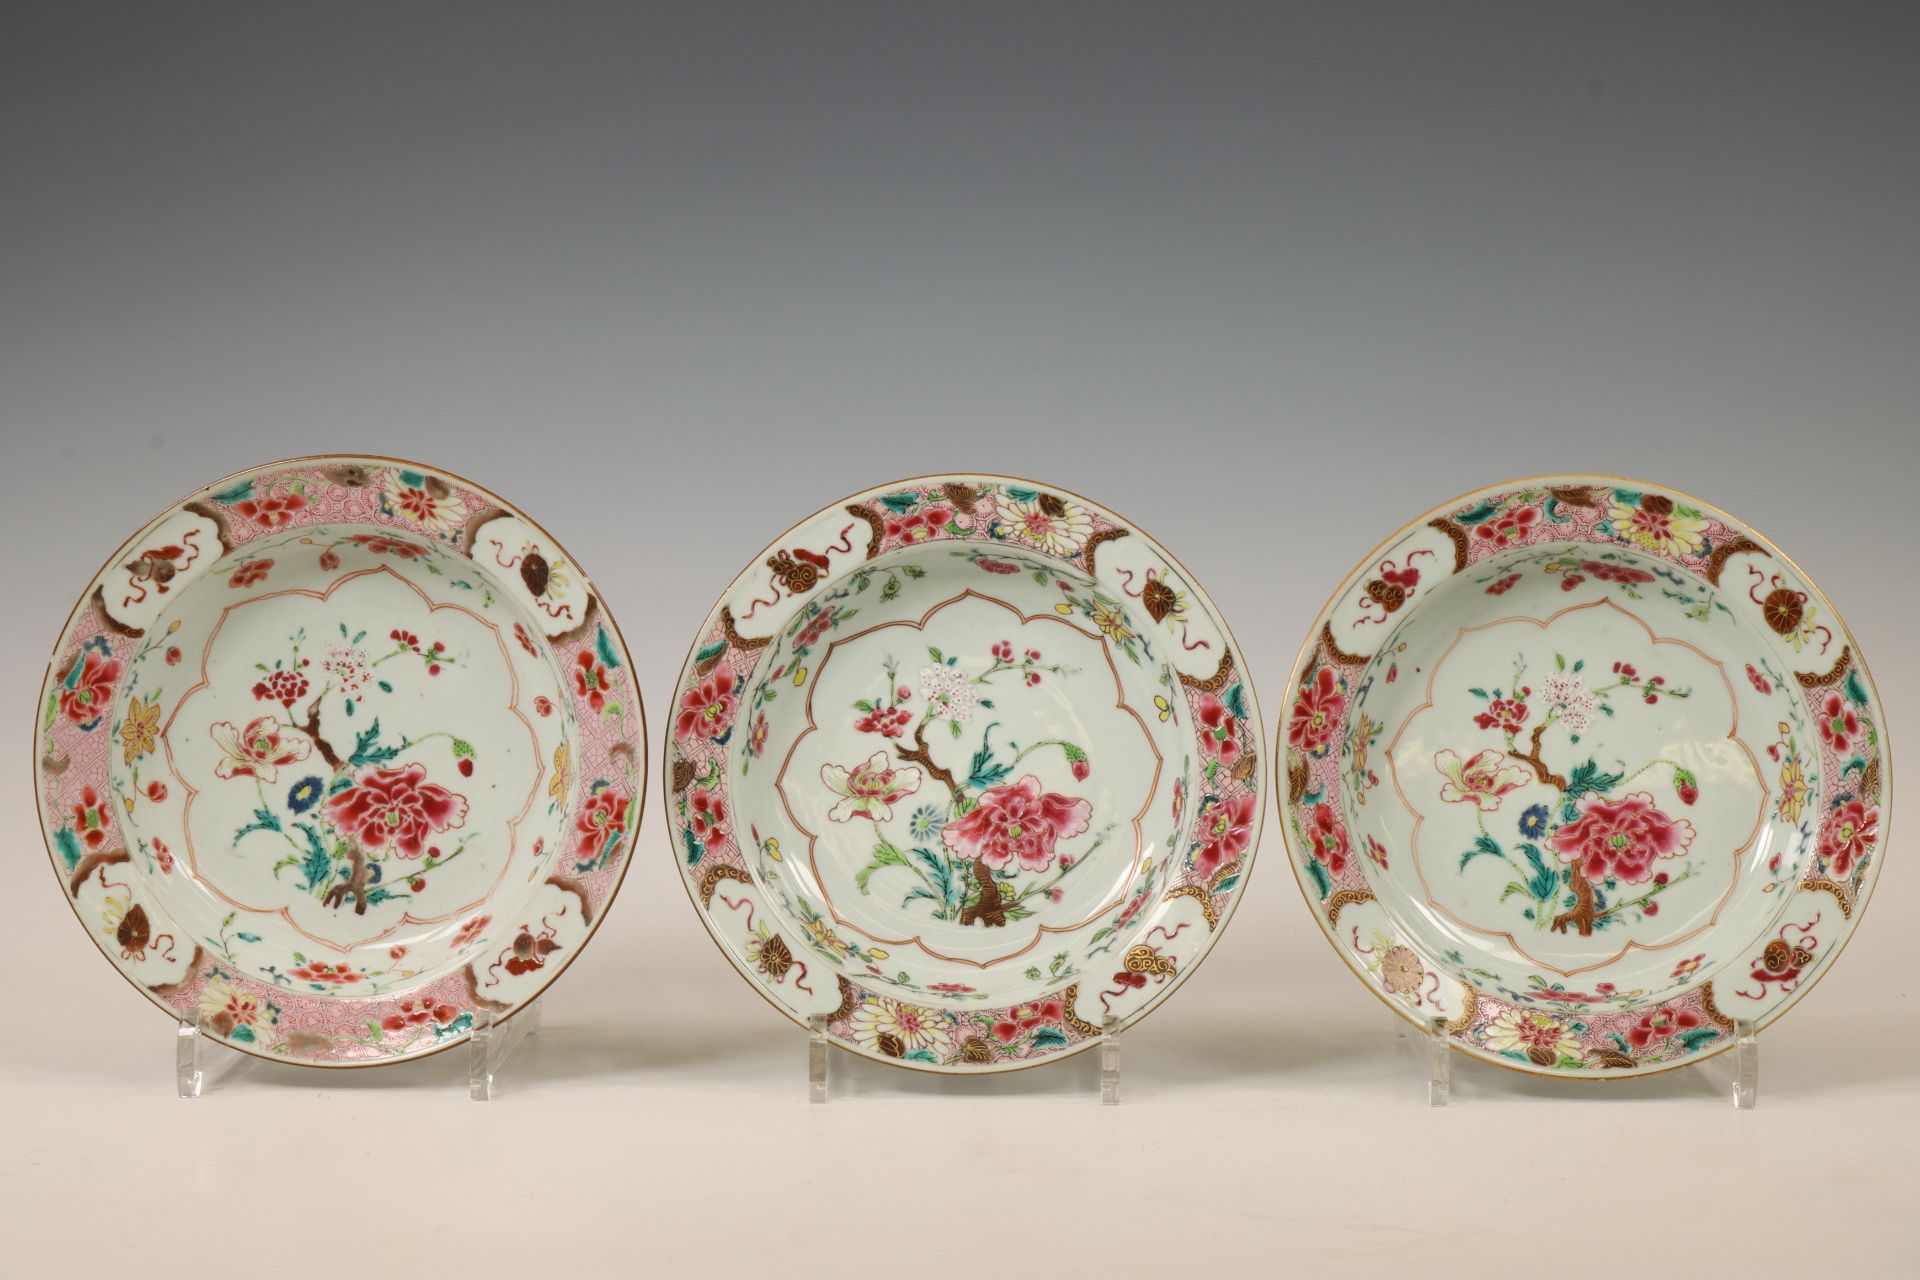 China, a set of three famille rose porcelain deep dishes, Qianlong period (1736-1795),